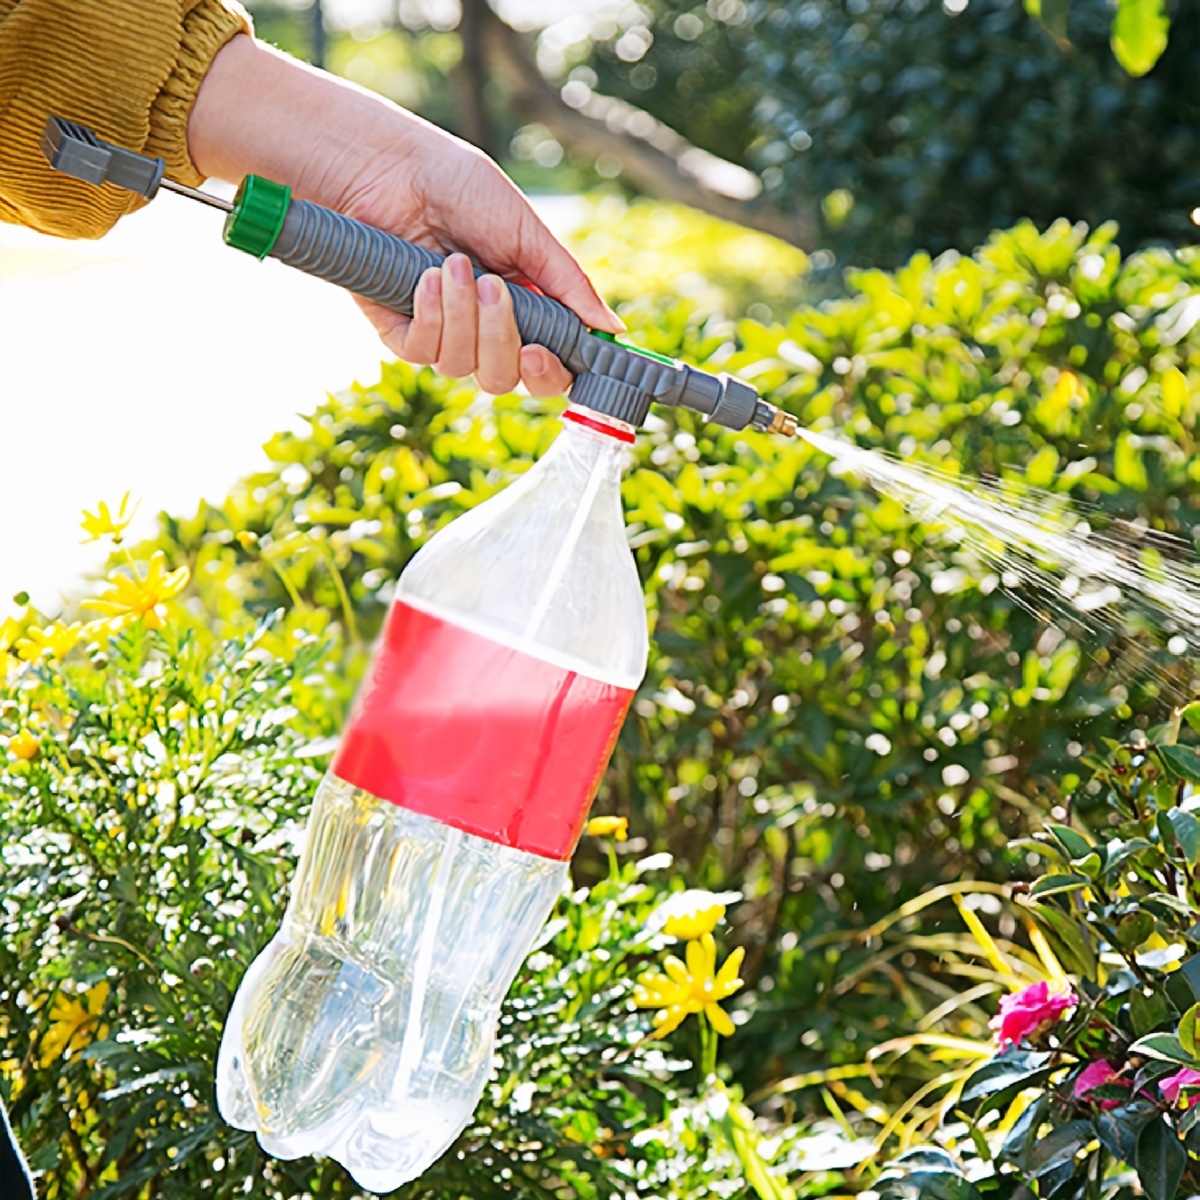 

Handheld Plastic Sprayer With Multiple Components - Garden Watering Spray Nozzle For Soda Bottles - Reciprocating Sprayer Gun For Fine Mist Or Direct Pouring